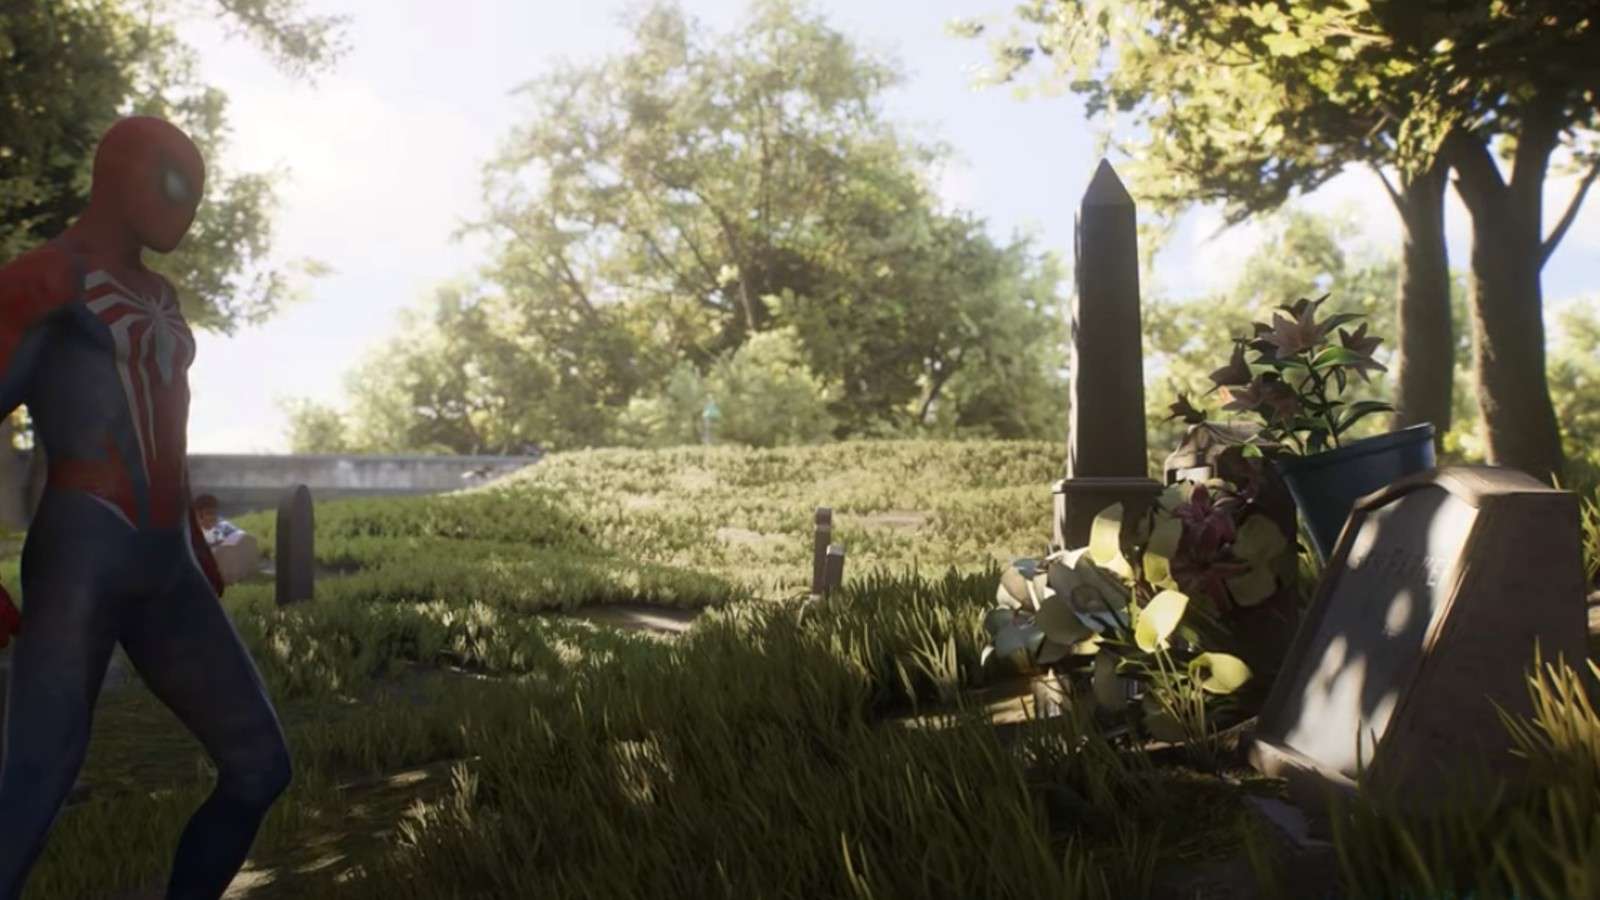 An image of Peter Parker at Aunt May's grave in Marvel's Spider-Man 2.